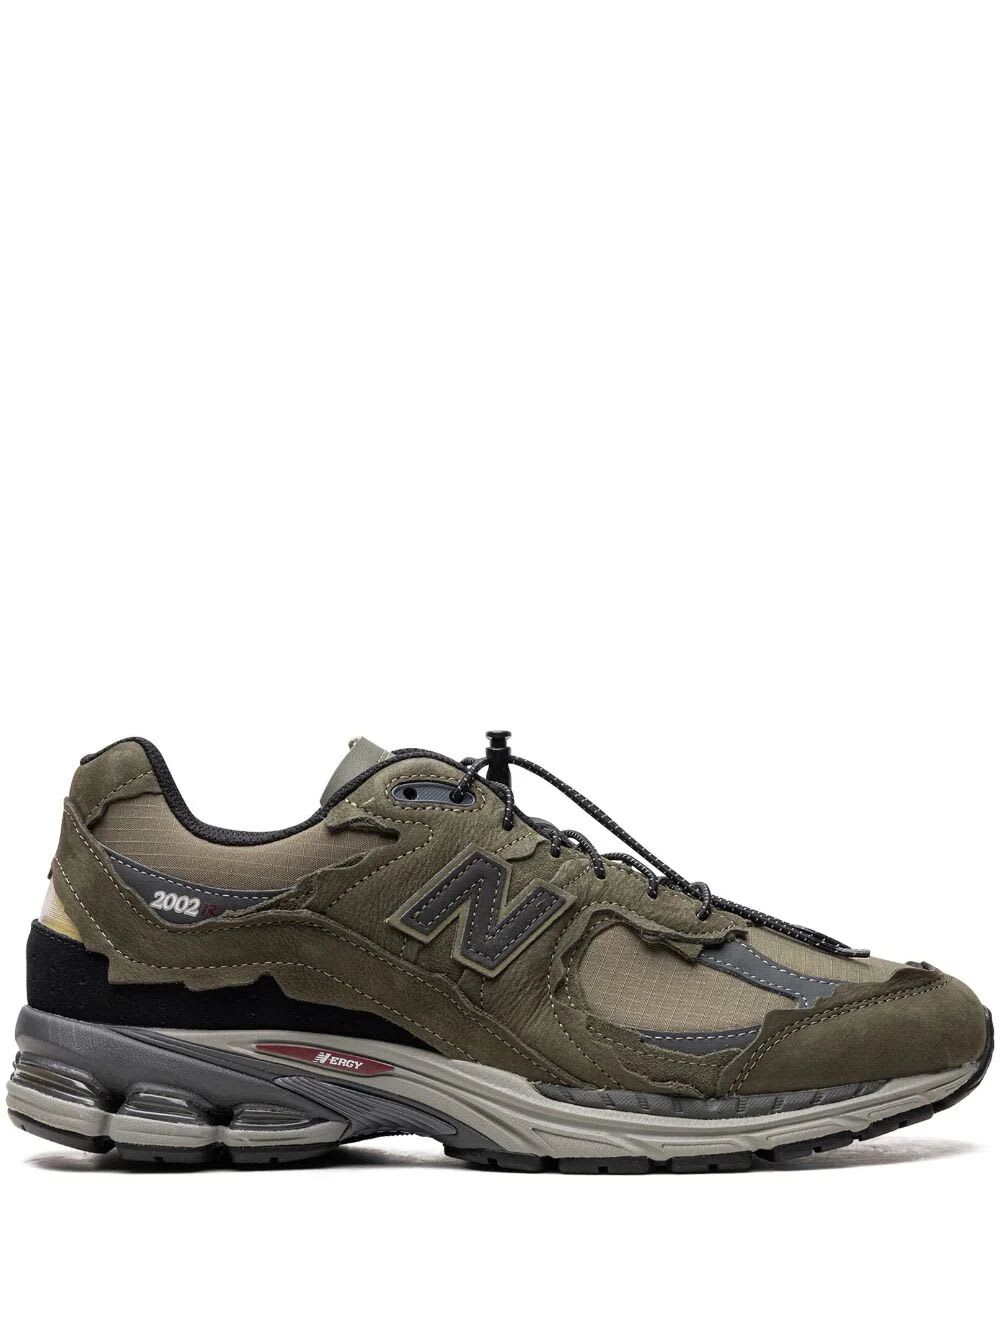 new balance 2002 lifestyle sneakers